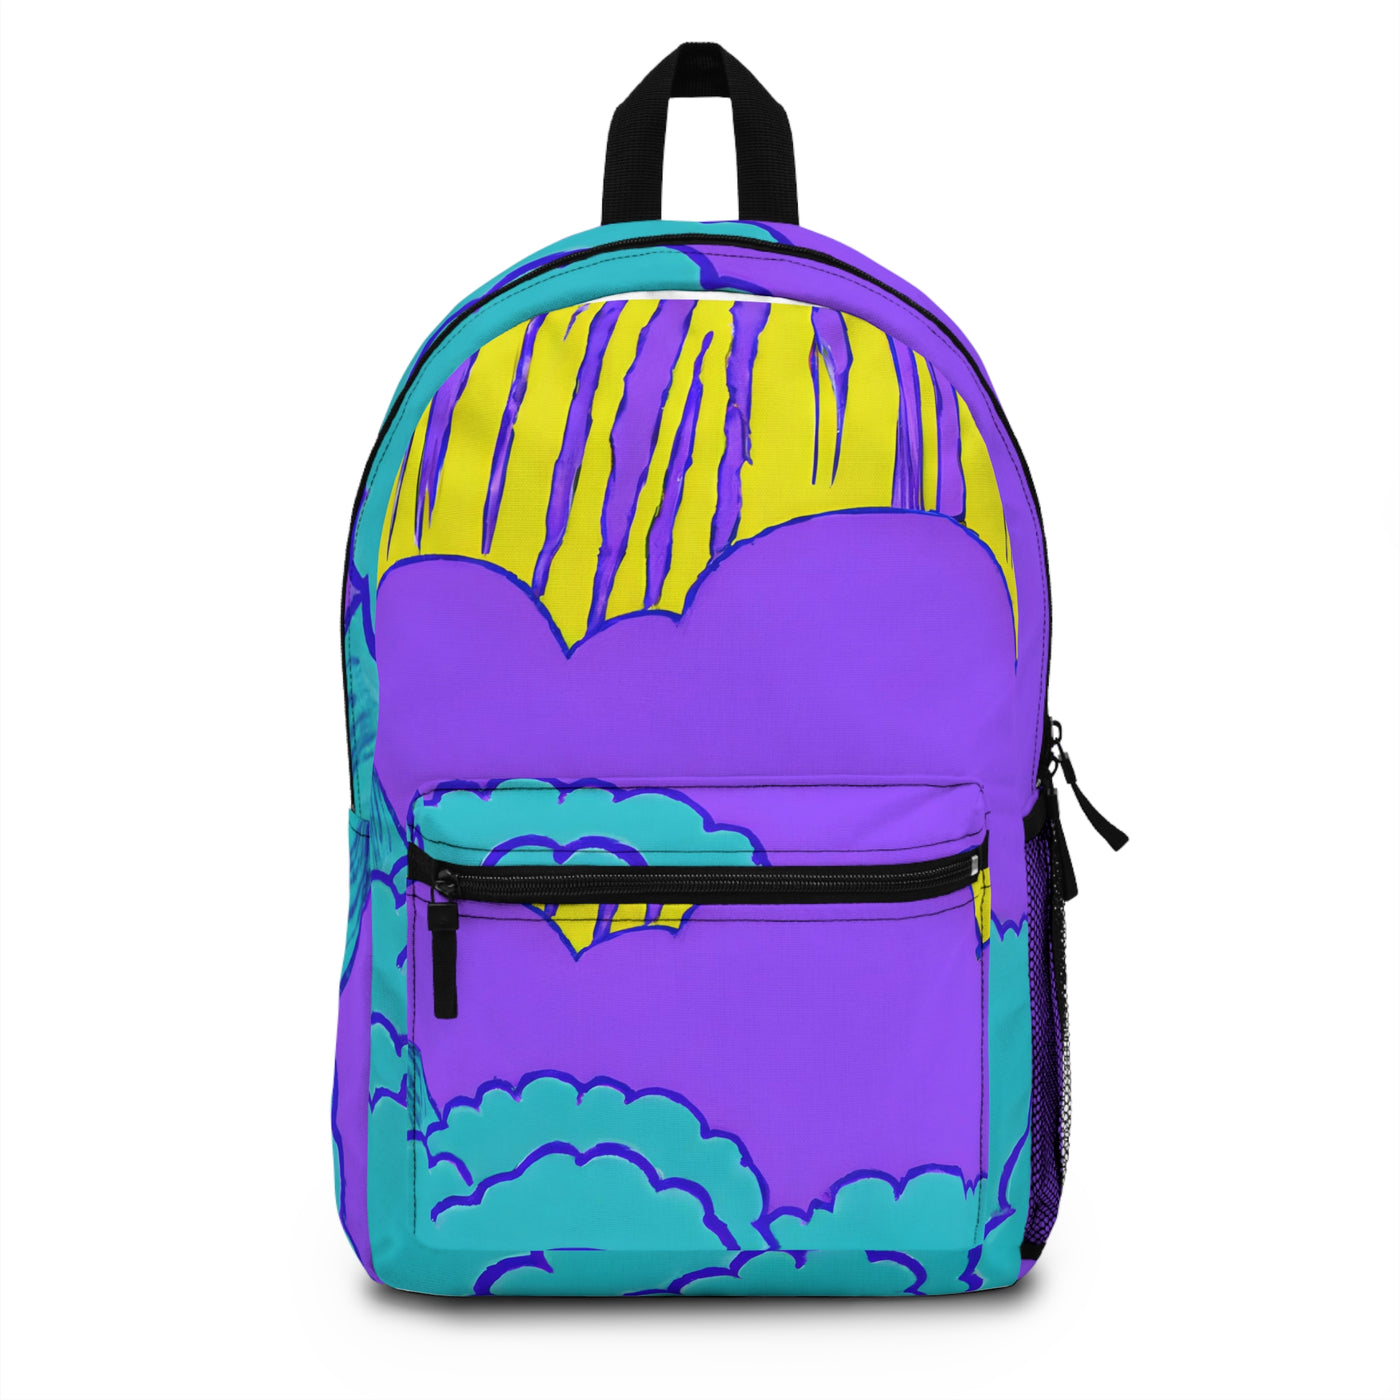 "Amazing Clouds of Colorful Joy!" Backpack